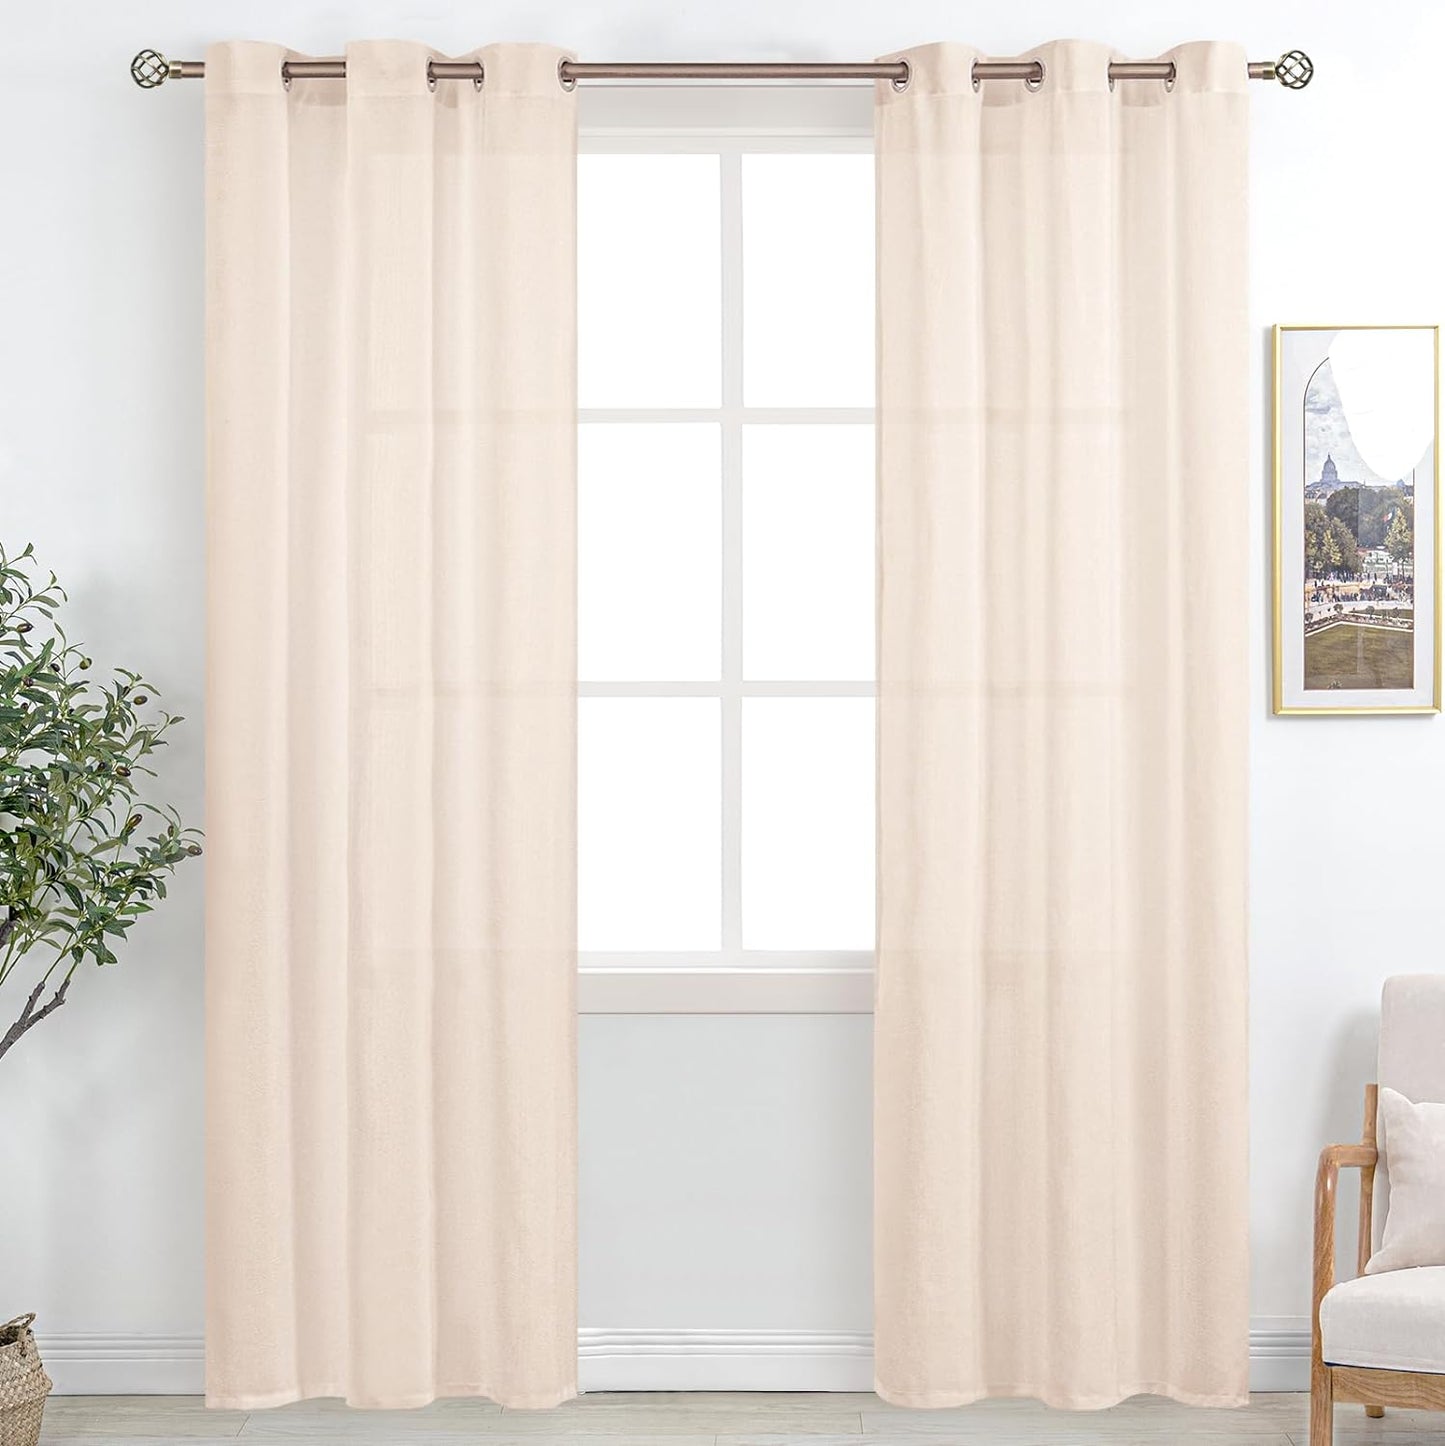 Bgment Natural Linen Look Semi Sheer Curtains for Bedroom, 52 X 54 Inch White Grommet Light Filtering Casual Textured Privacy Curtains for Bay Window, 2 Panels  BGment Light Pink 42W X 84L 